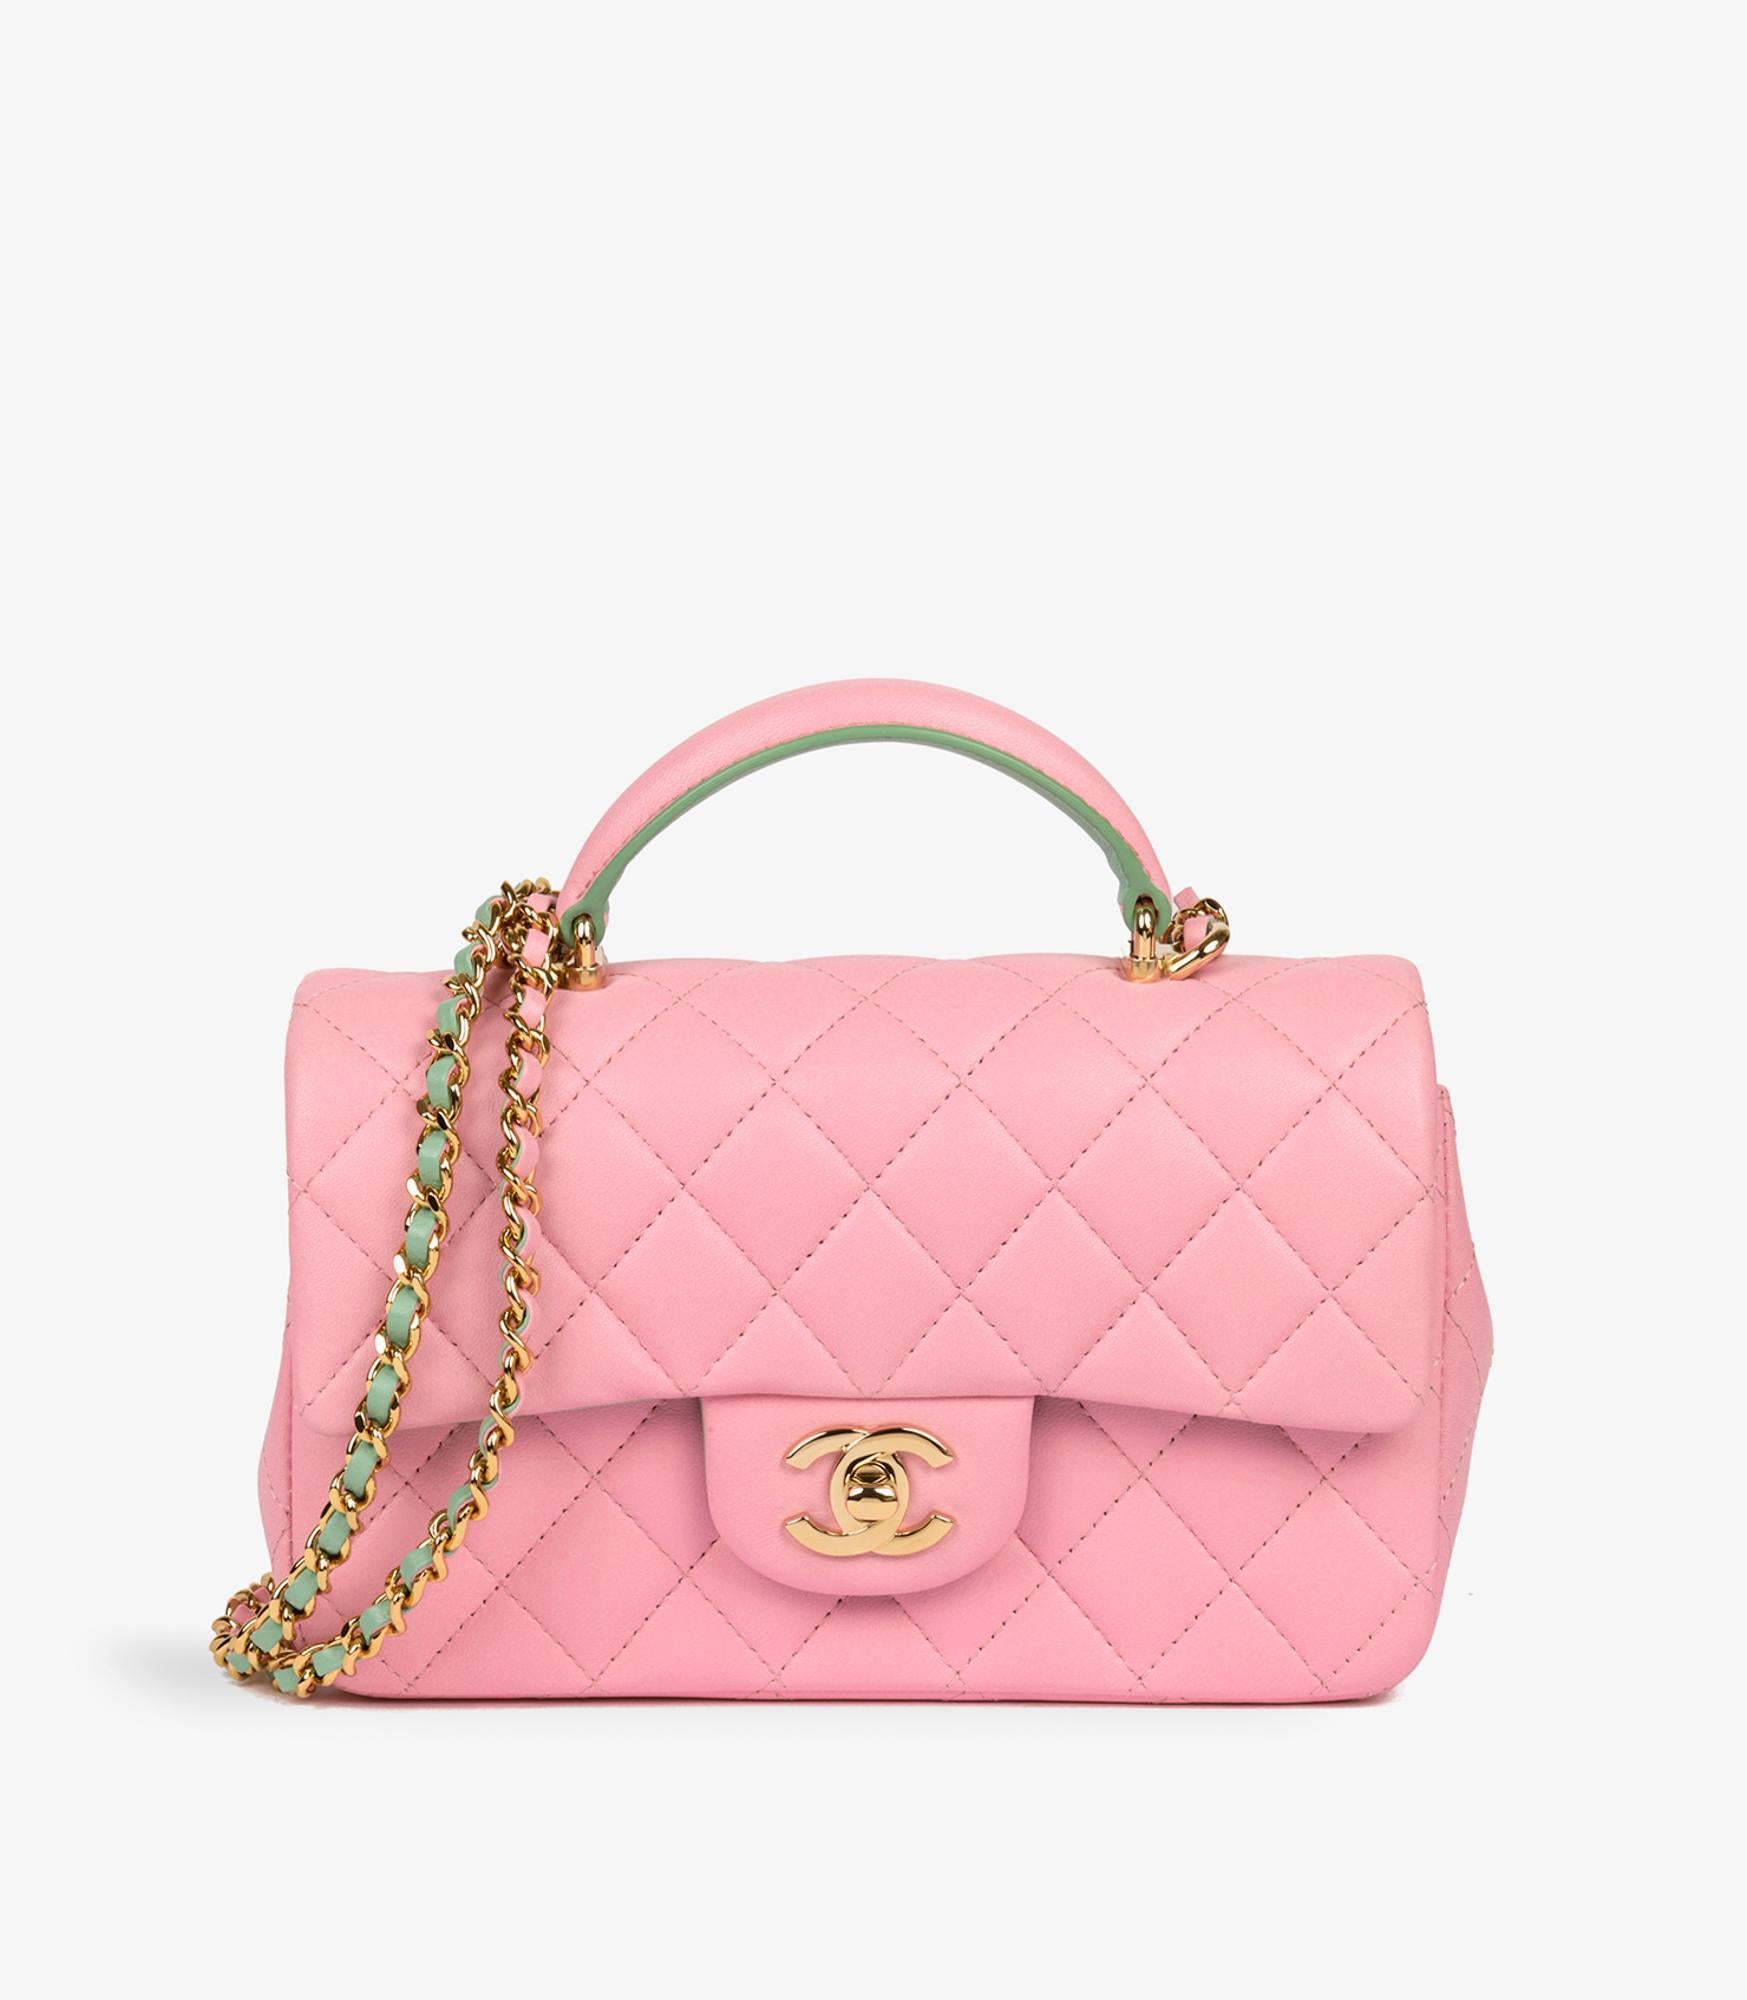 Chanel Pink & Green Quilted Lambskin Rectangular Mini Flap Bag With Top Handle

Brand- Chanel
Model- Rectangular Mini Flap Bag with Top Handle
Product Type- Crossbody, Shoulder, Top Handle
Serial Number- A1ENE77K
Age- Circa 2022
Accompanied By-